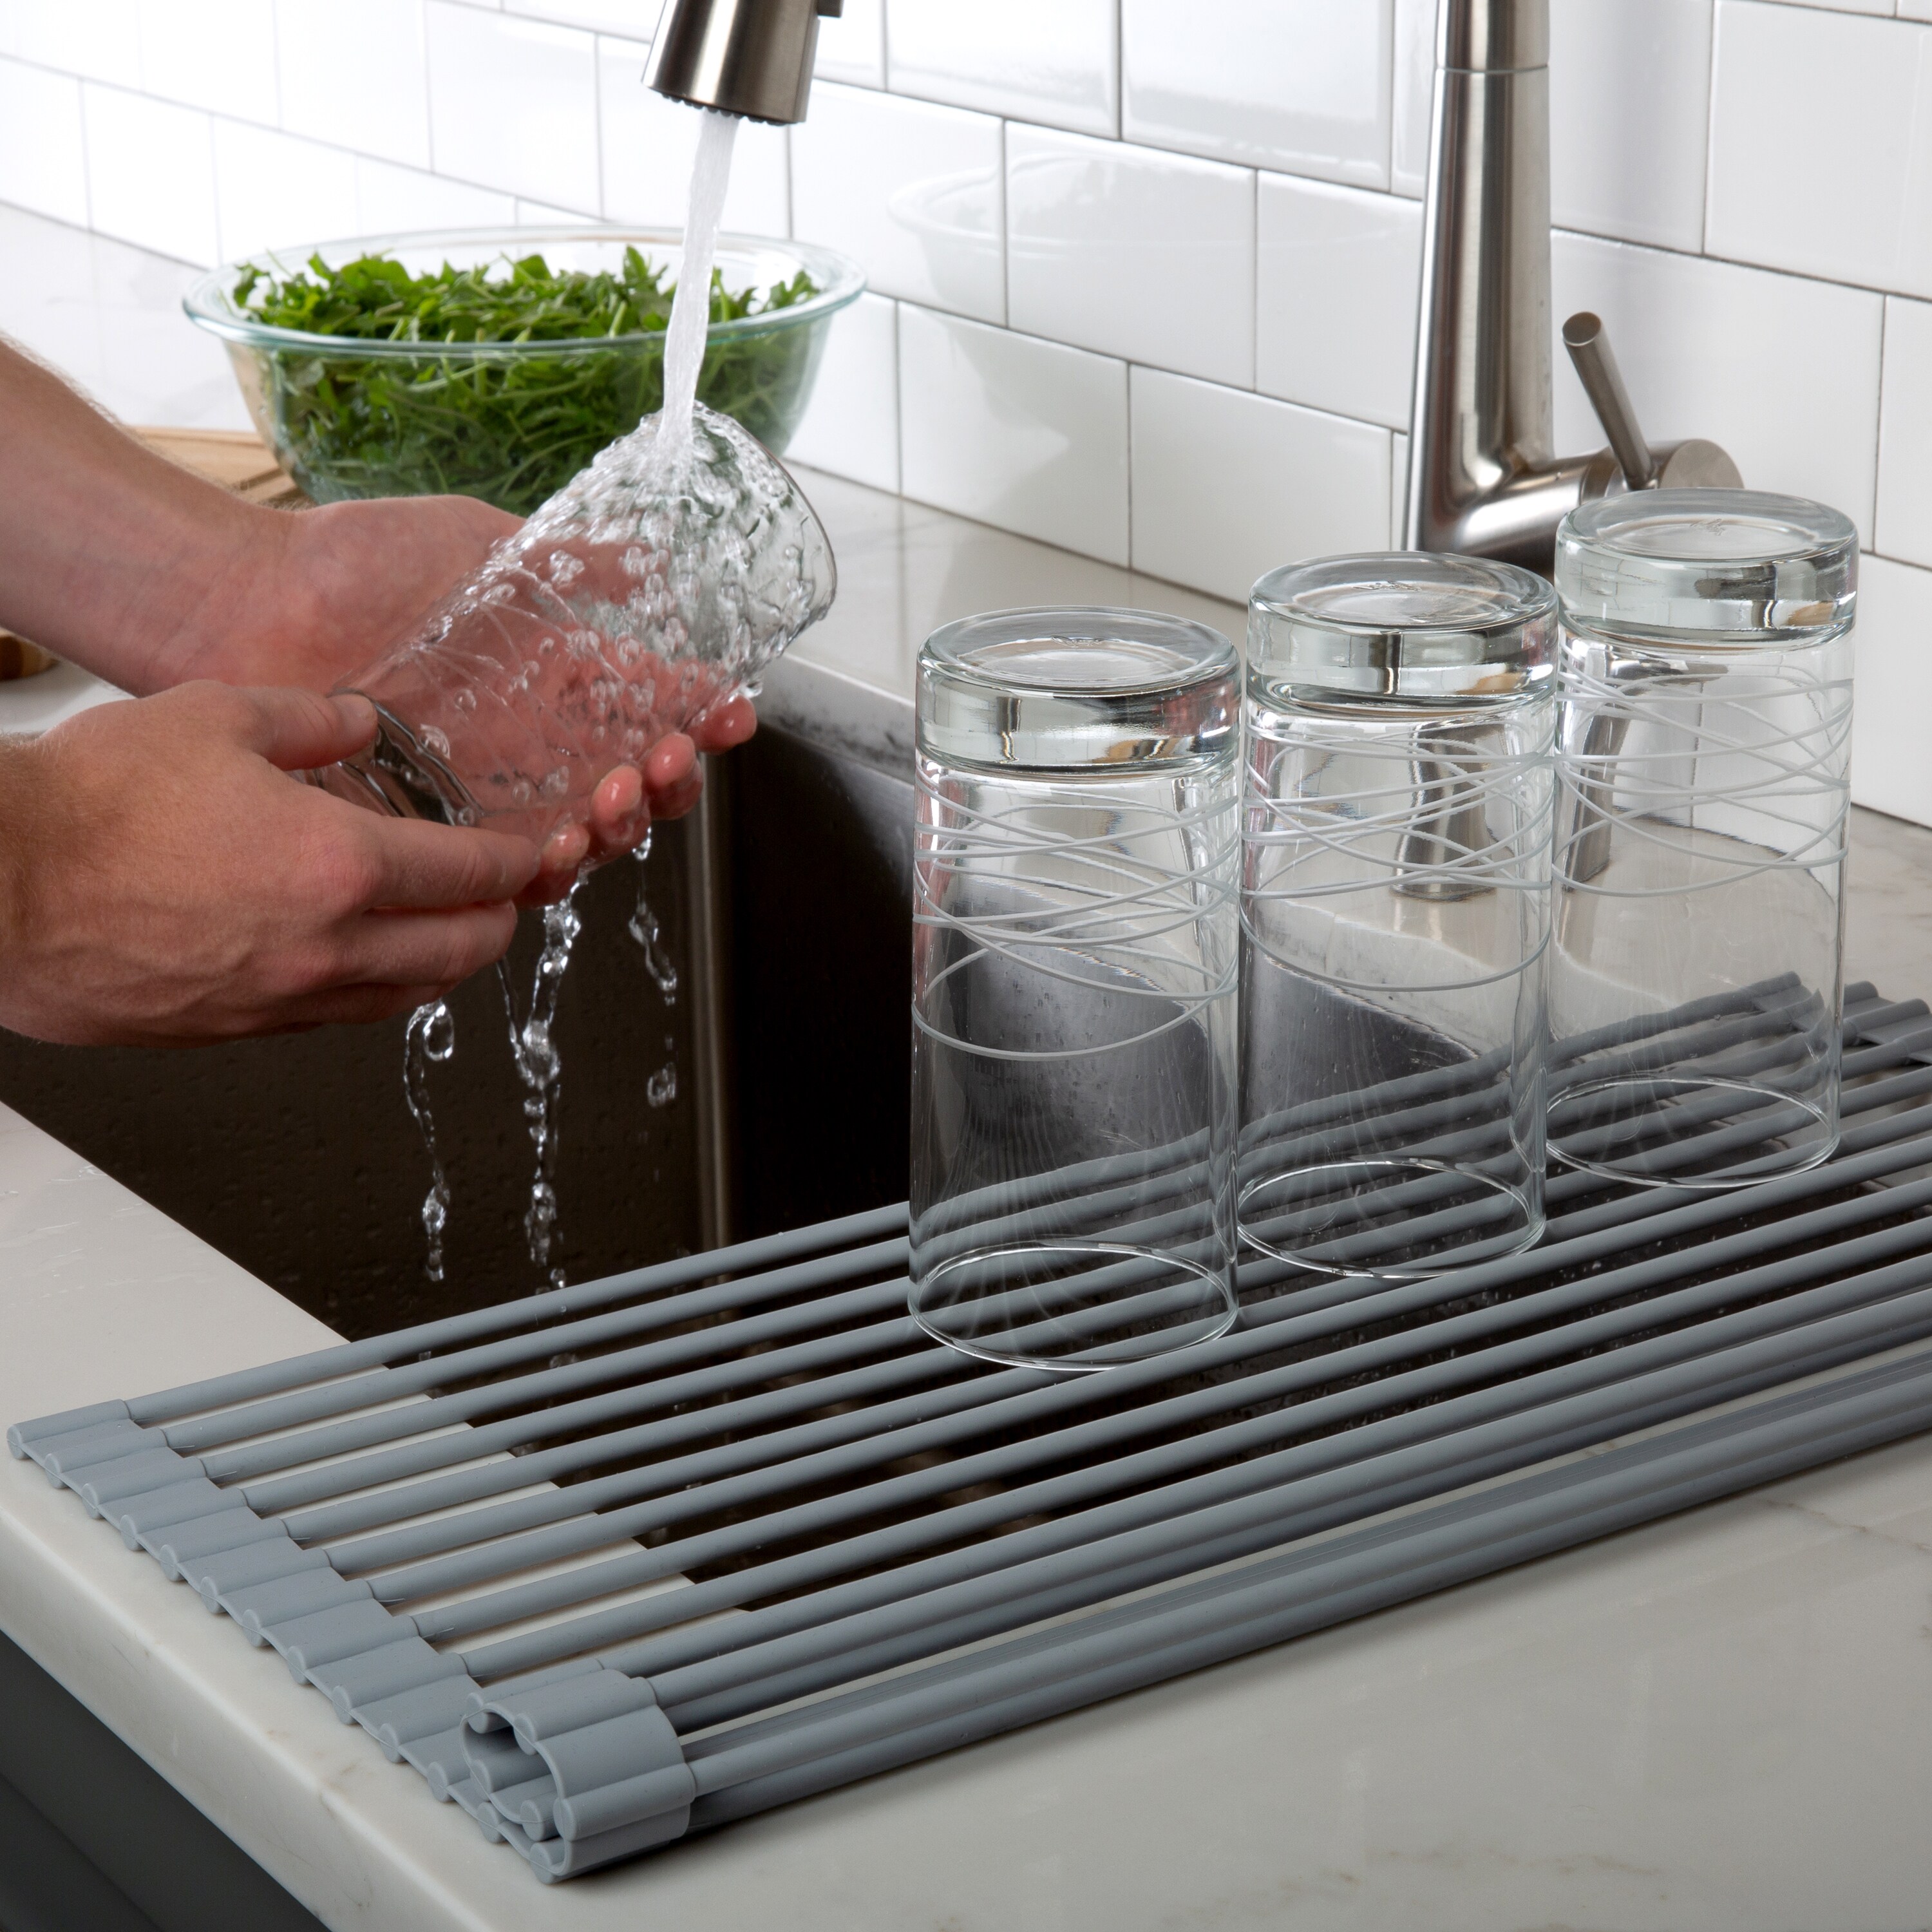 Over and Back Roll Up 20.5 in. x 12.25 in. Sink Drying Rack with Caddy